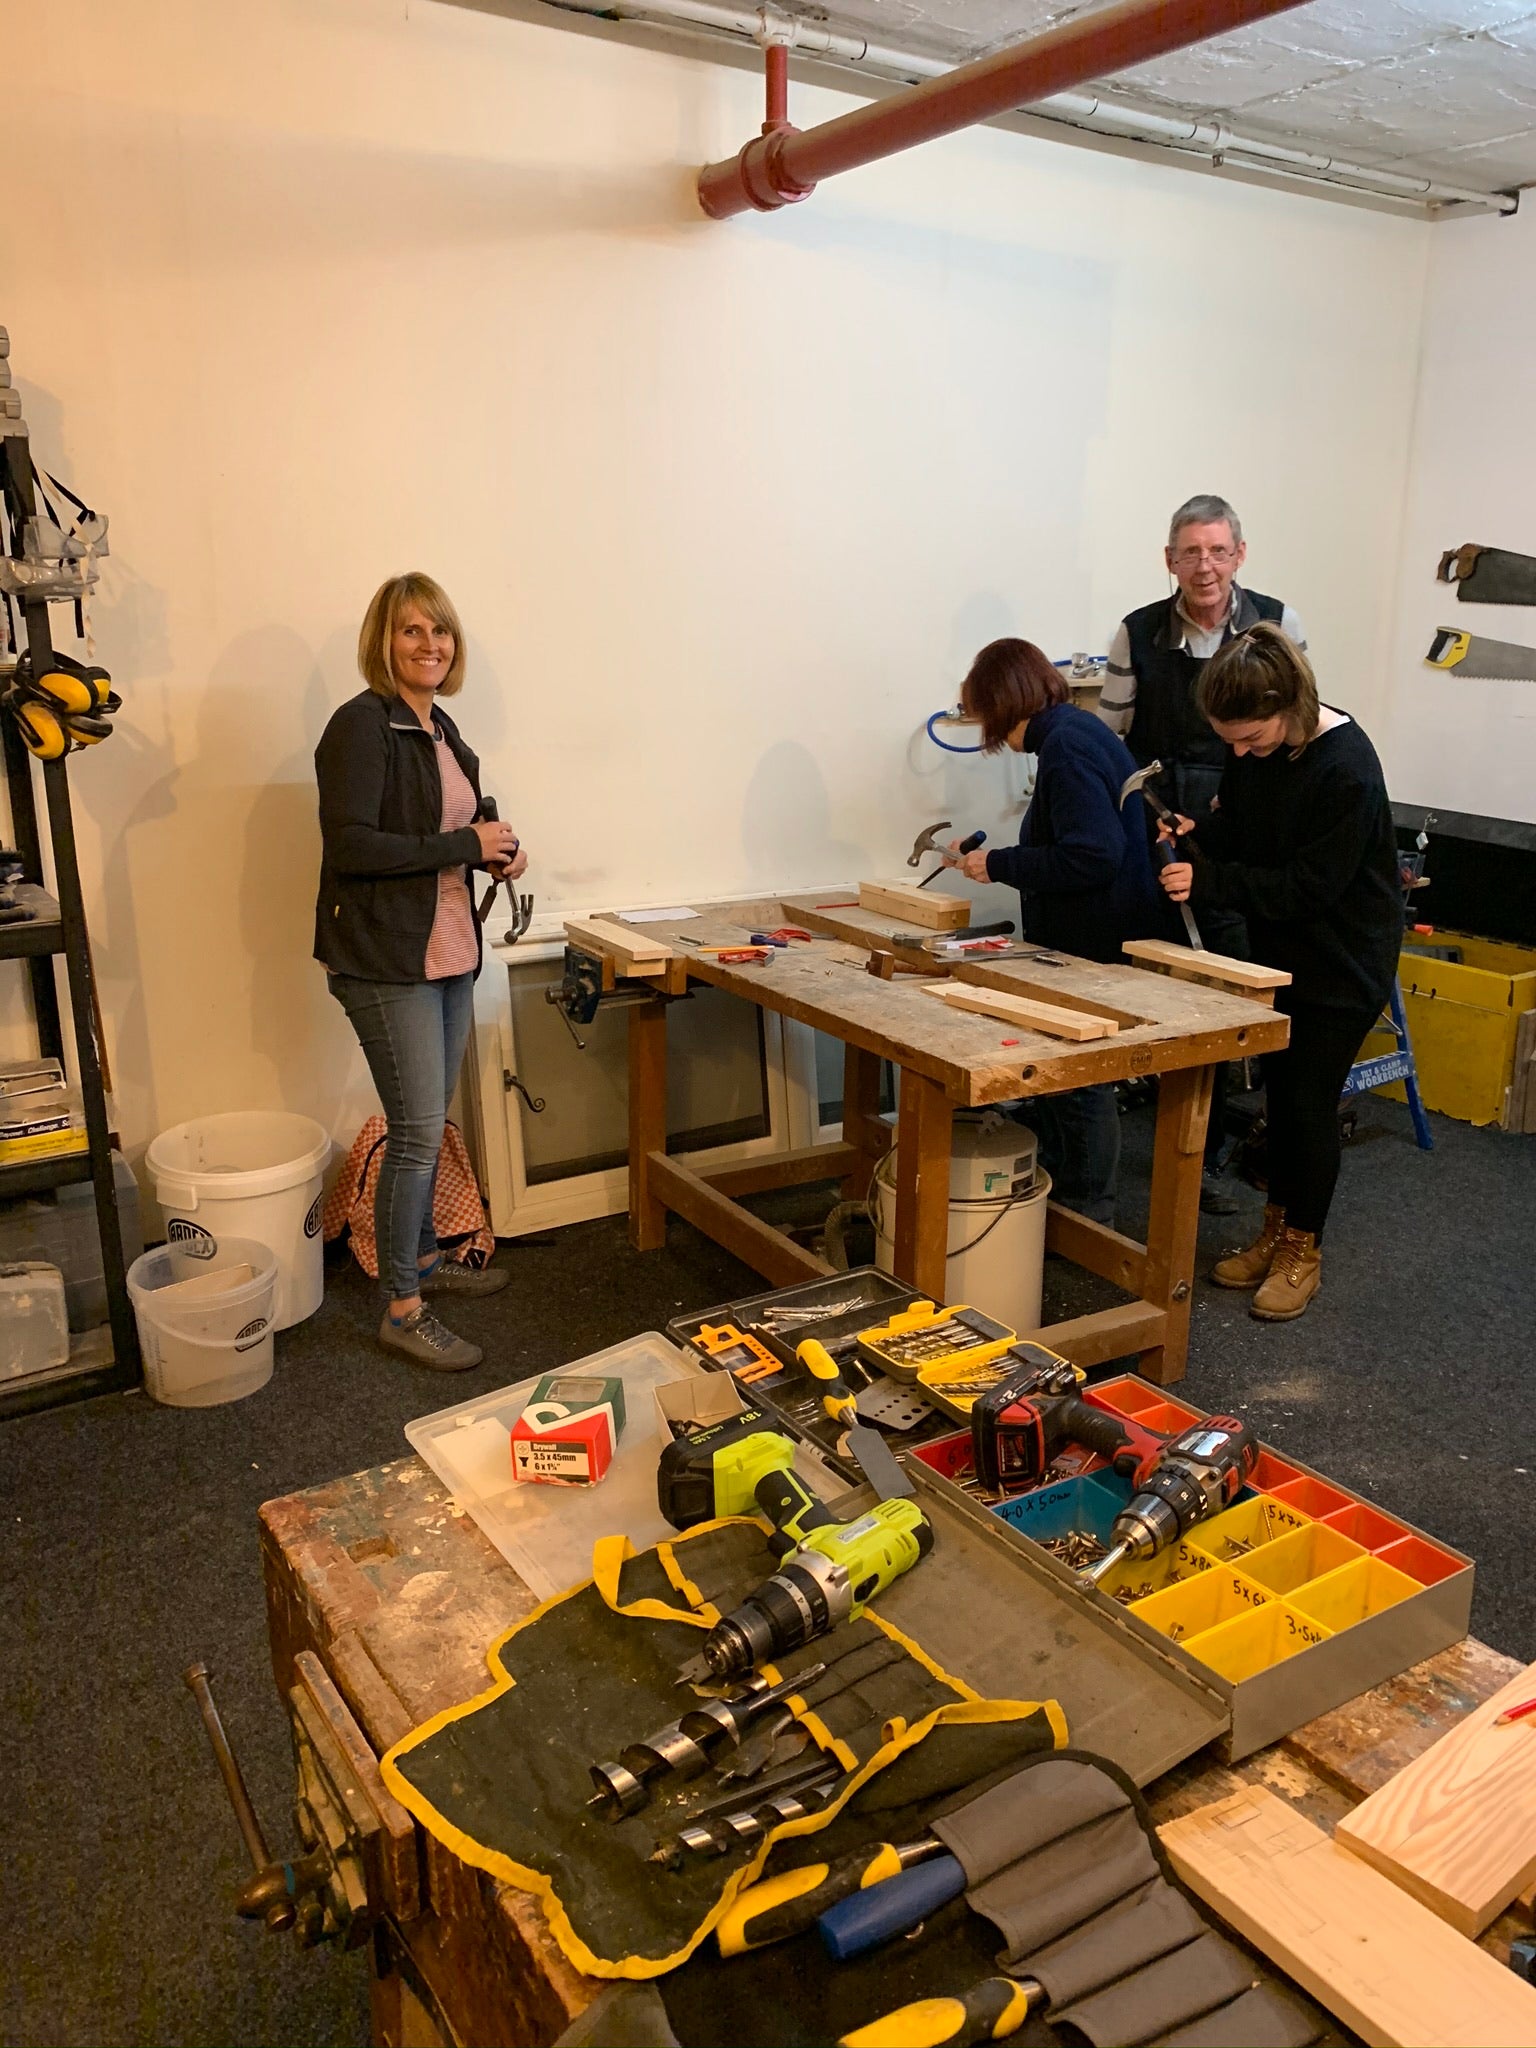 GROUPON UPGRADE from 1 Day Beginners DIY to the 2 Days Hand & Power Tools Course